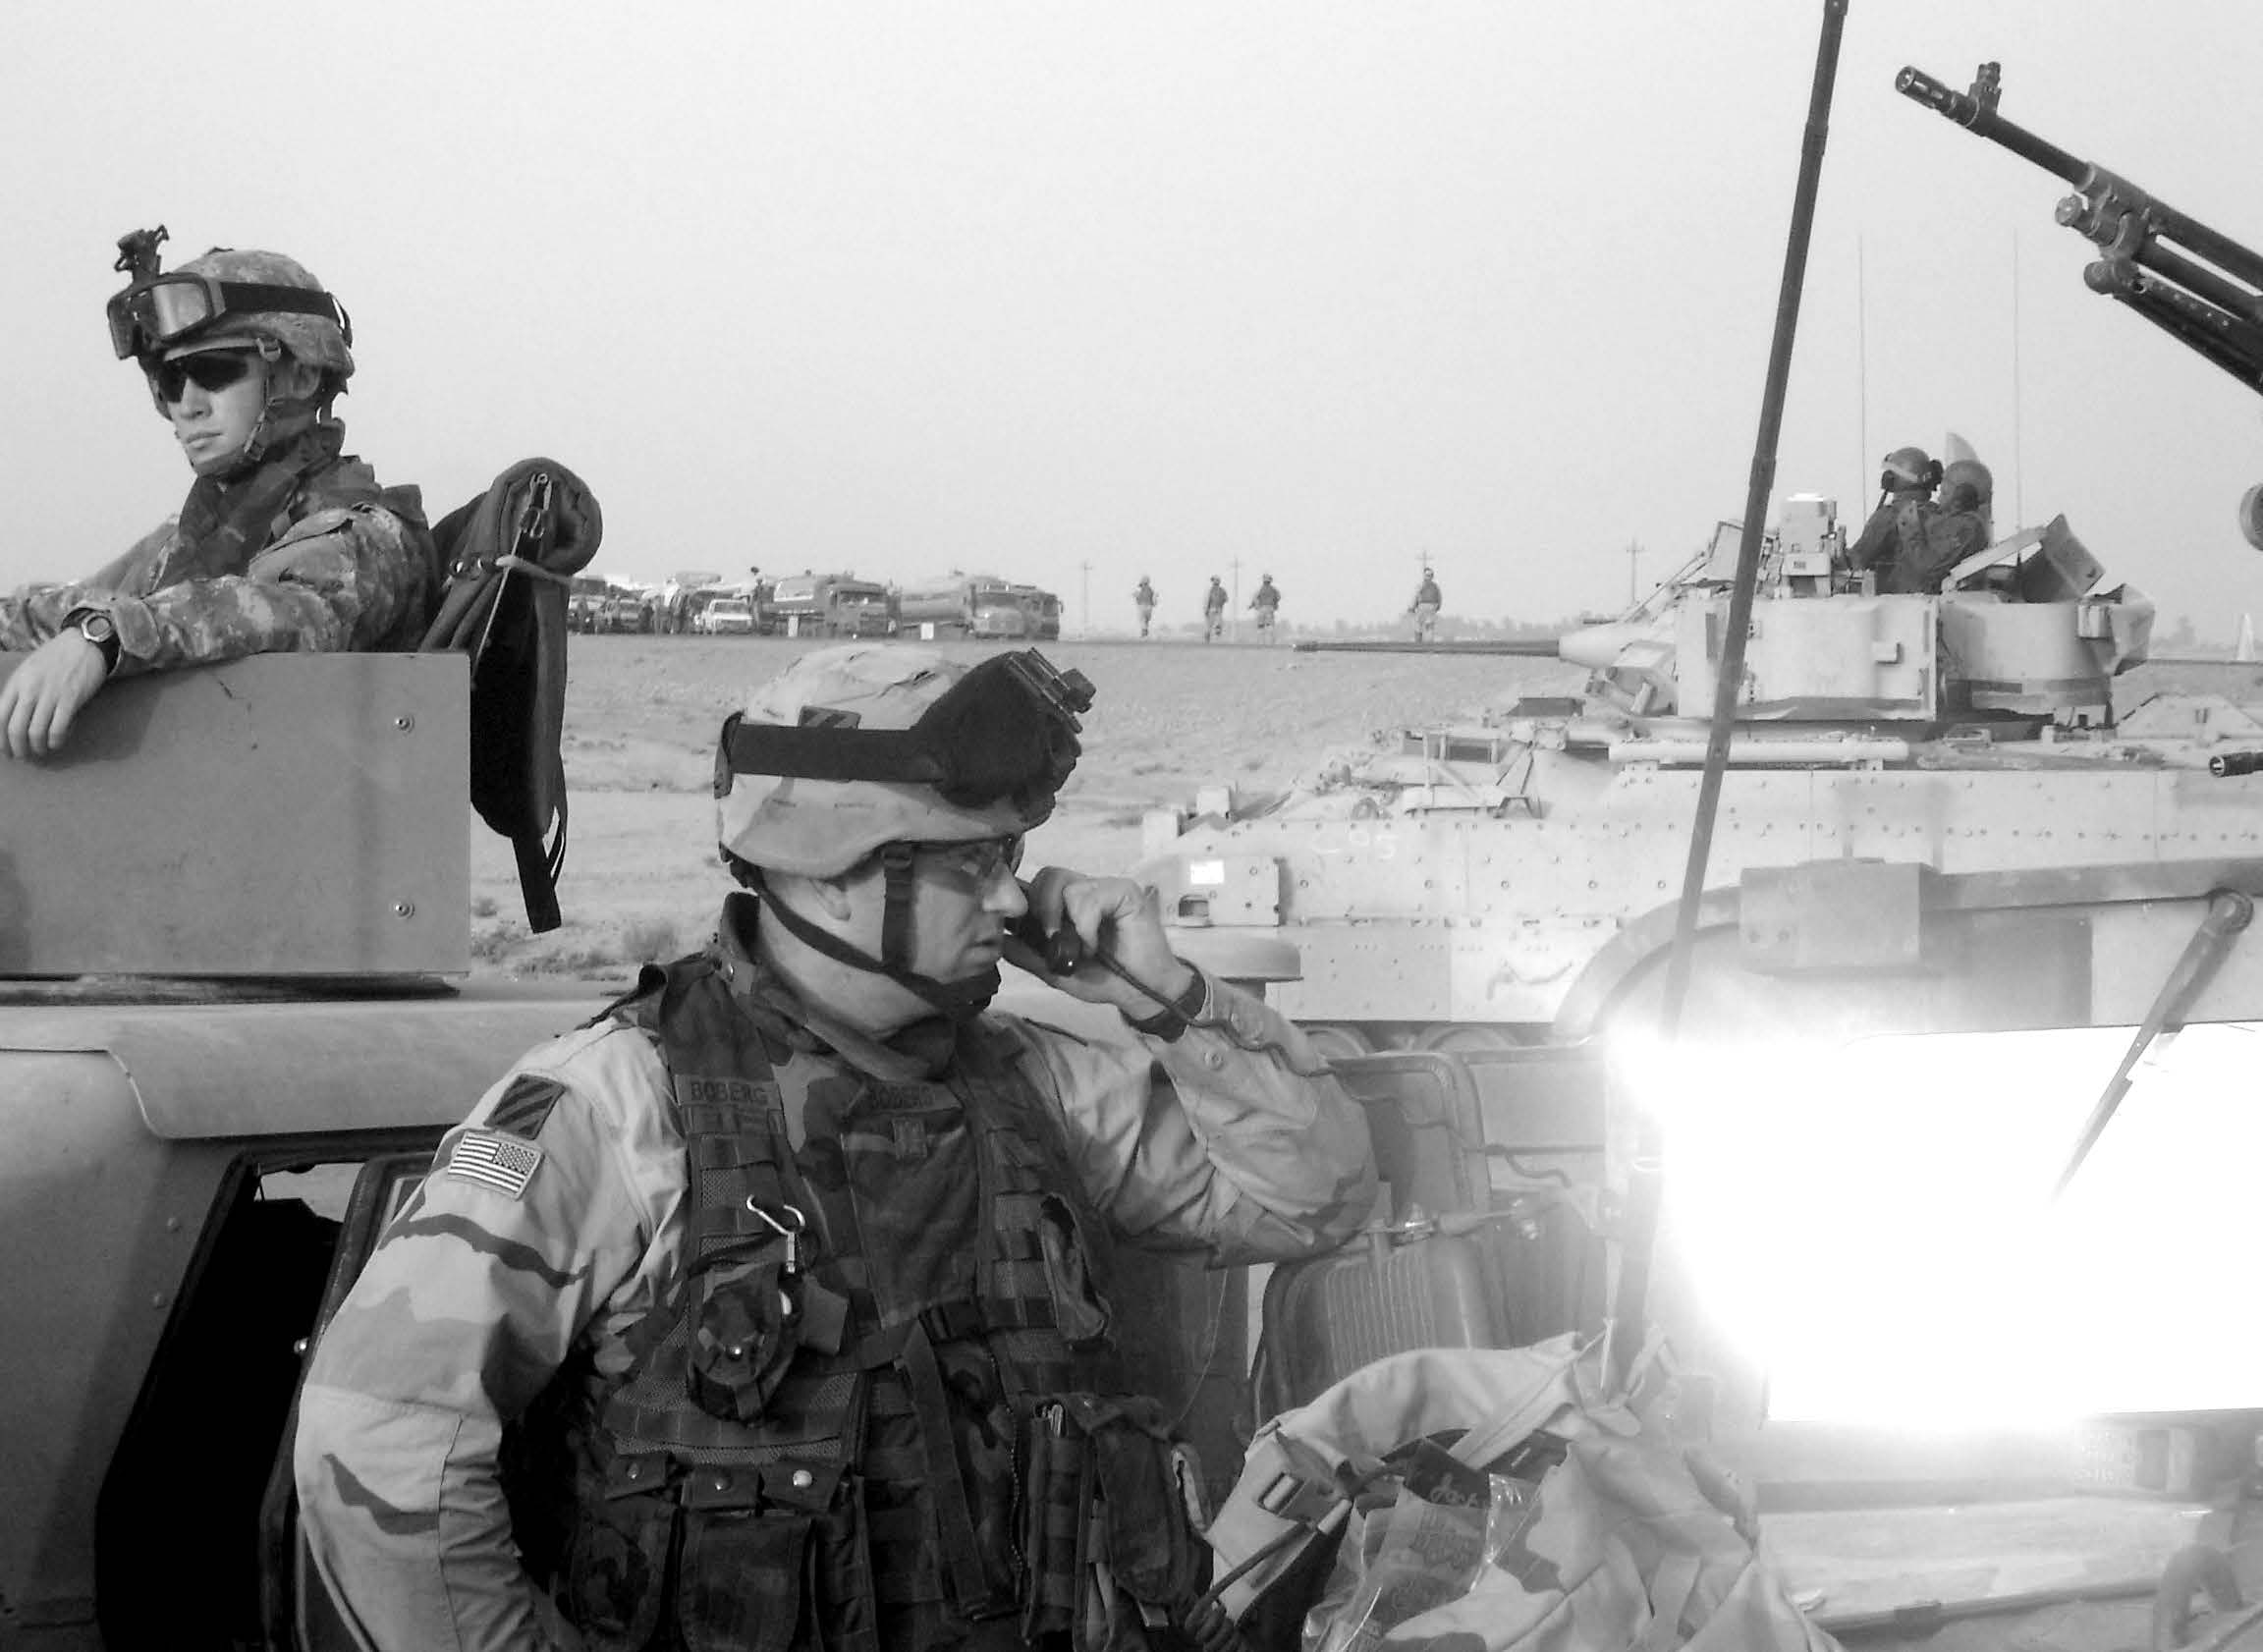 Major Marc “Dewey” Boberg (center) is shown during an armor operation as the S3 of 1st Battalion, 30th Infantry, in Diyala Province during Operation Iraqi Freedom in 2005. Courtesy of Marc E. “Dewey” Boberg.